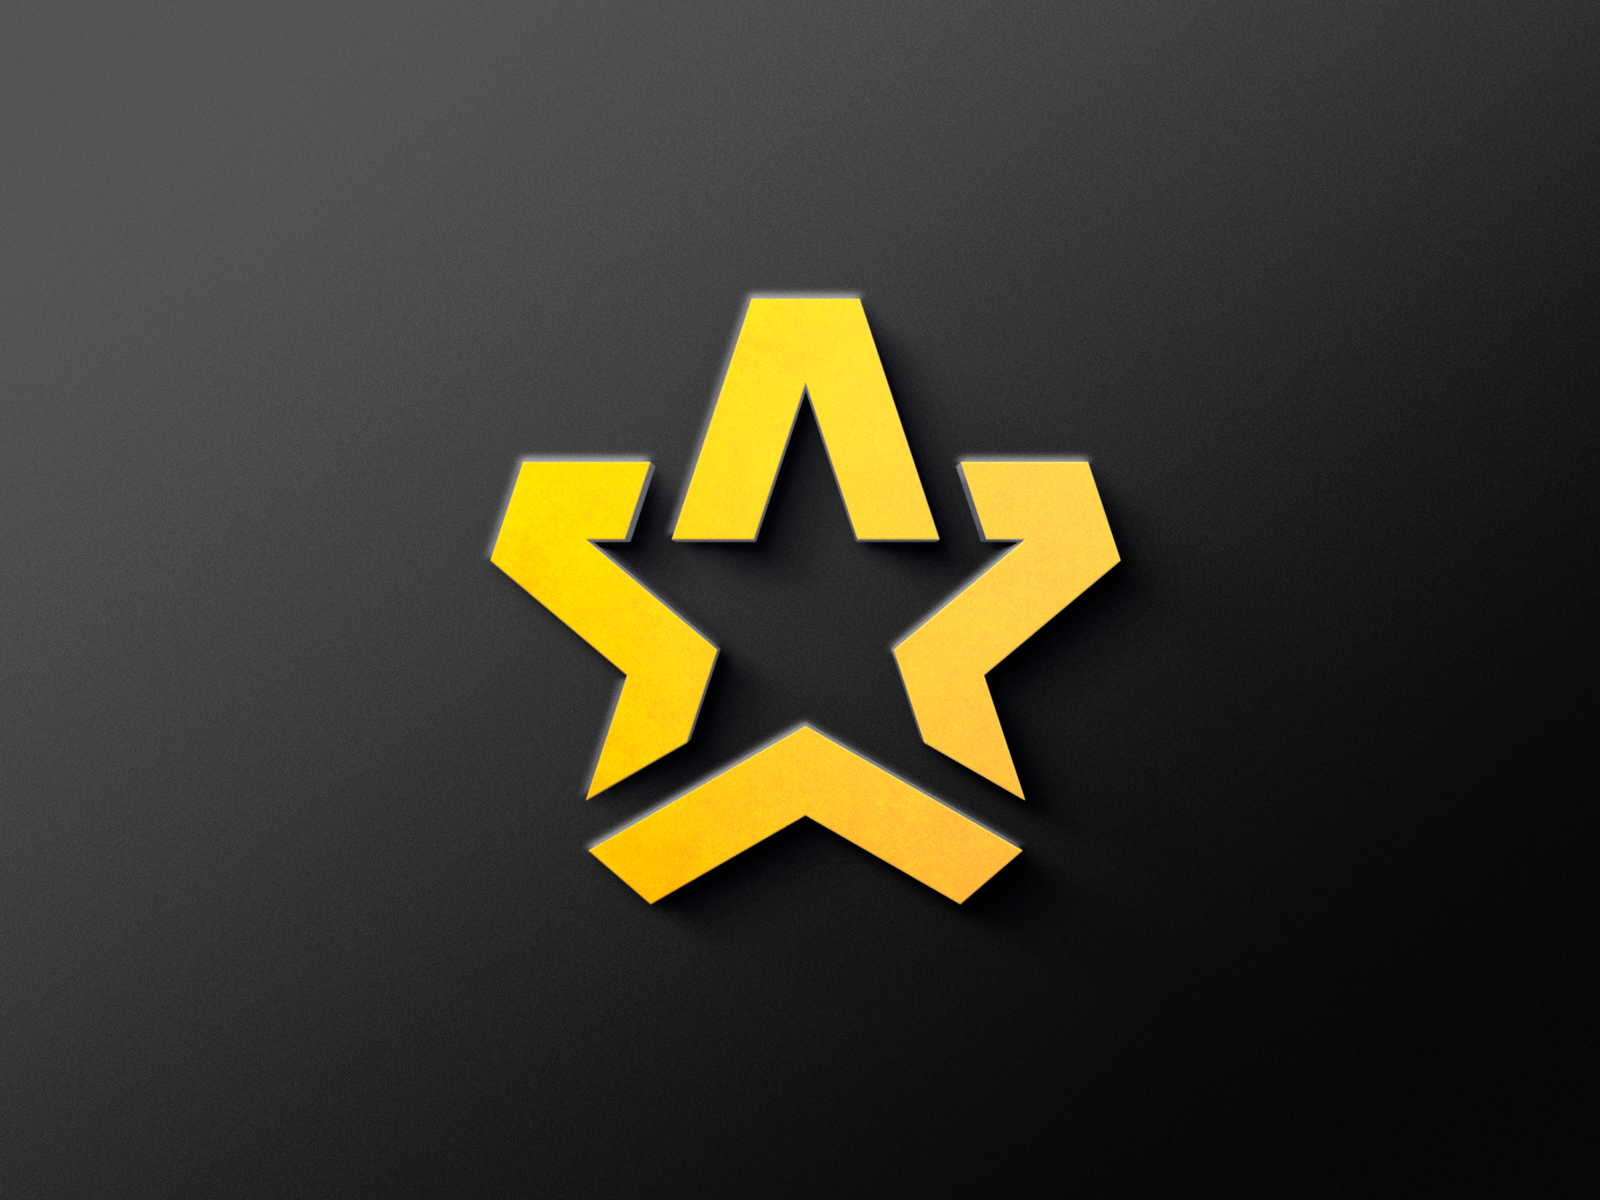 U.S. Army Logo Concept by Dylan Winters on Dribbble